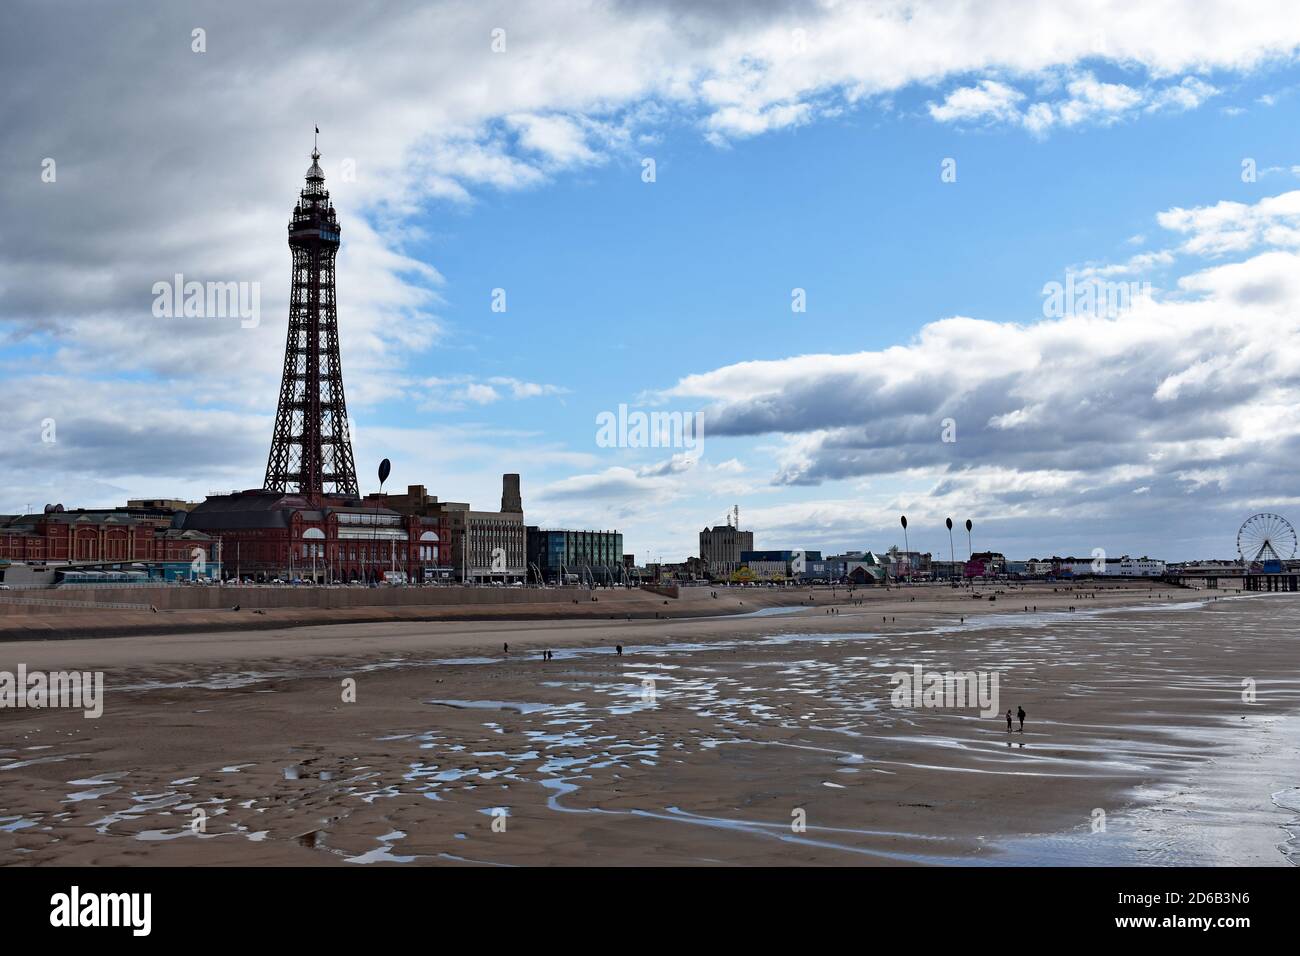 Blackpool's famous seafront and promenade featuring the Blackpool Tower and Central Pier complete with a ferris wheel.  Lancashire, England. Stock Photo